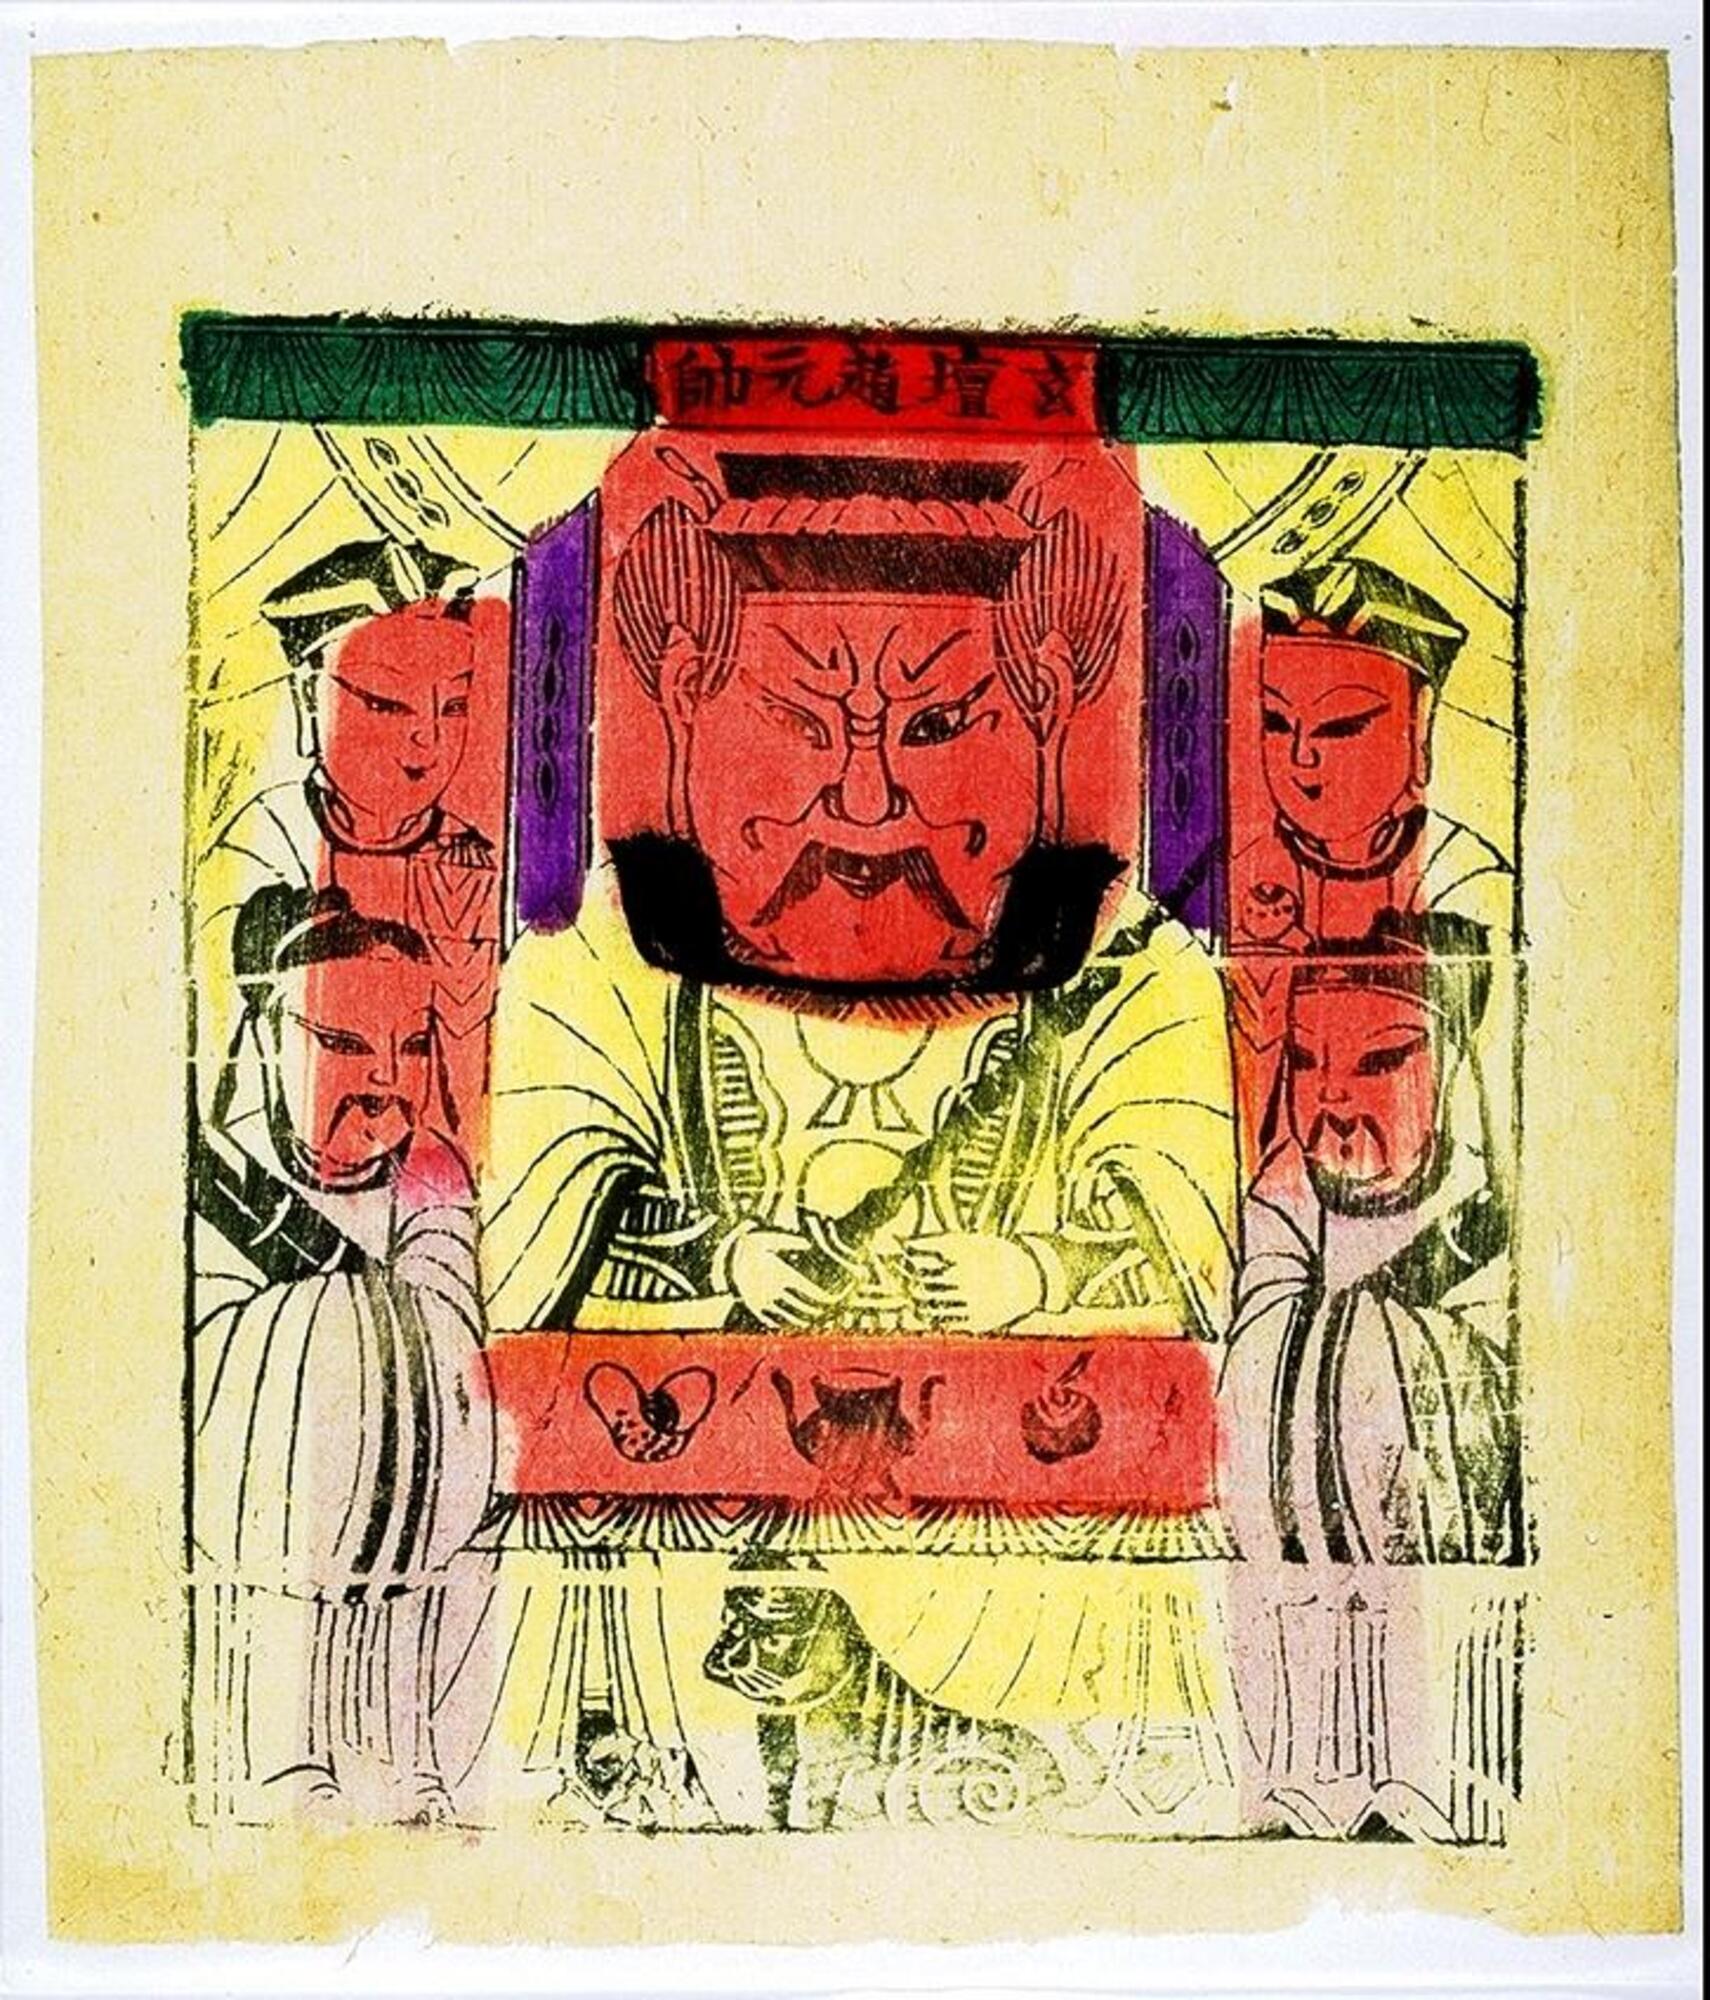 A center figure is dressed in a robe and headdress behind a table. He is holding a staff and is surrounded by four figures, two on each side. They are turned towards him and standing with their hands together. On the table, there is a gold ingot, a vessel, and a peach. Underneath the table, there is a tiger.&nbsp;